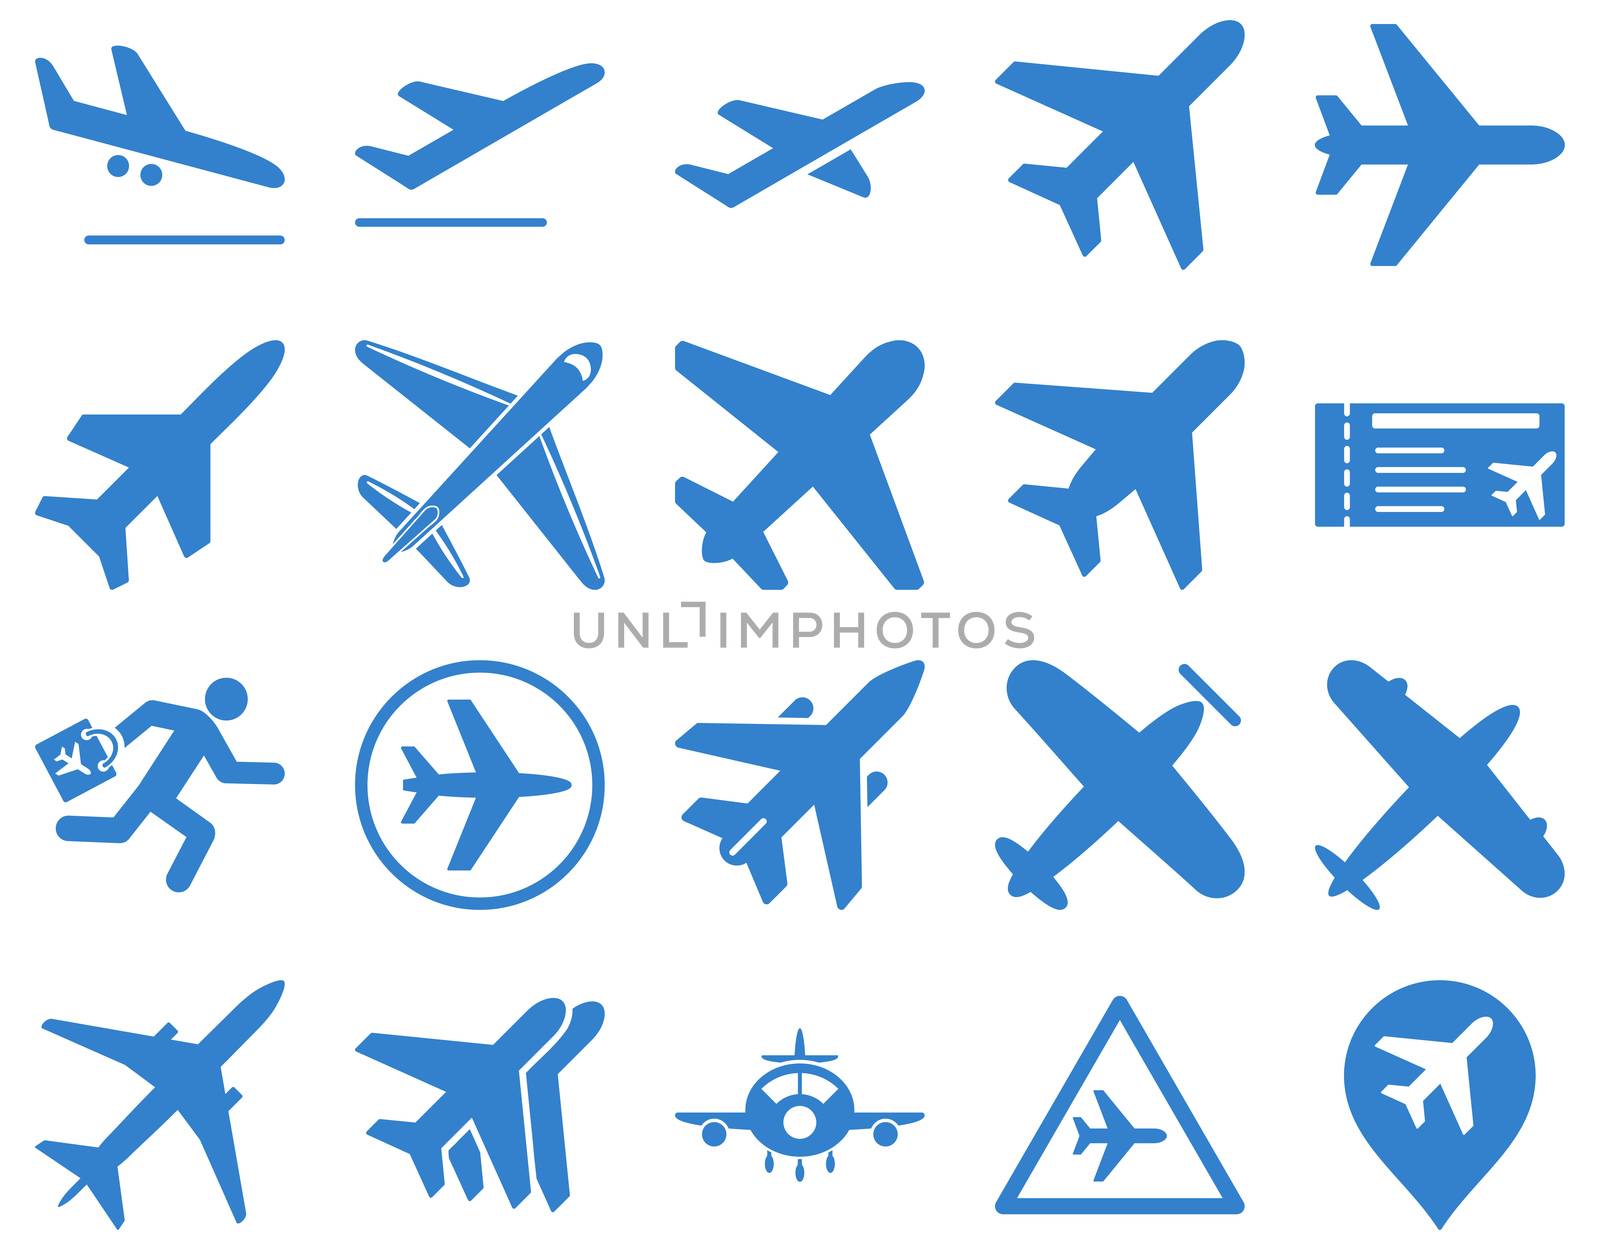 Aviation Icon Set. These flat icons use cobalt color. Raster images are isolated on a white background.